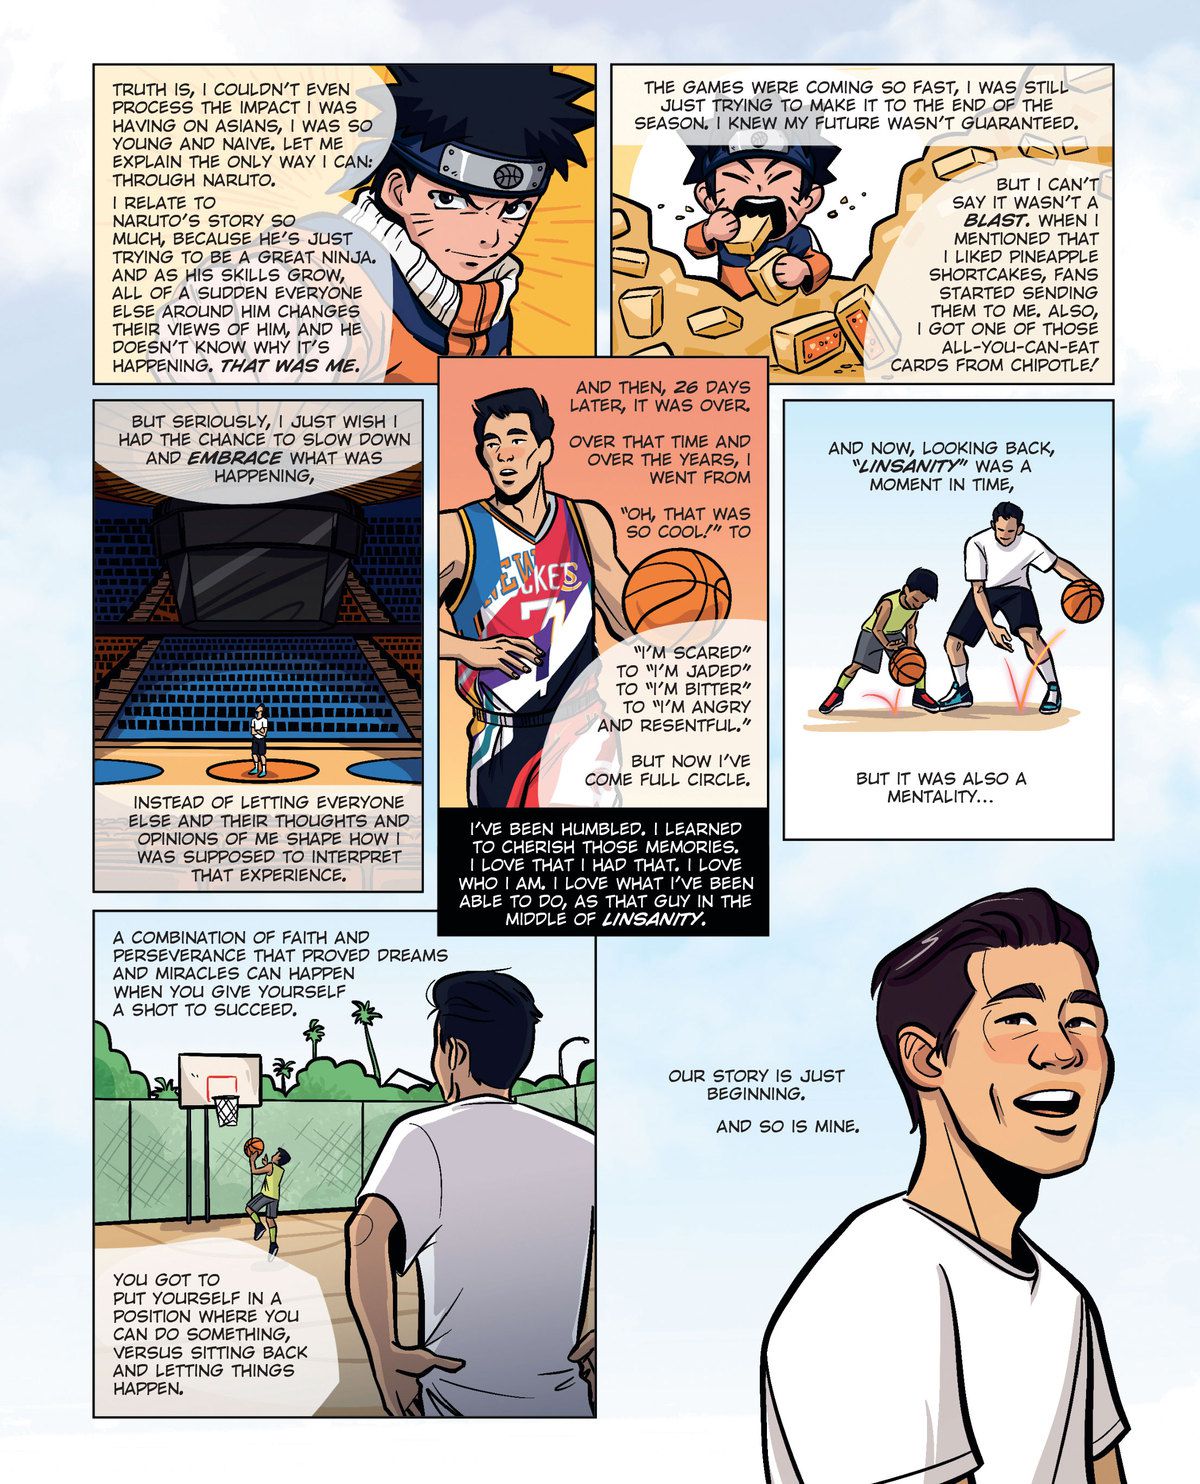 Page 4 of 4. Lin compares his journey to that of the manga character Naruto, who experiences massive change as his skills develop. While Linsanity was an intense period for Lin, he also calls it a “blast” and wishes that he could have appreciated it more in the moment. Linsanity is over, but Jeremy Lin’s story is only beginning.